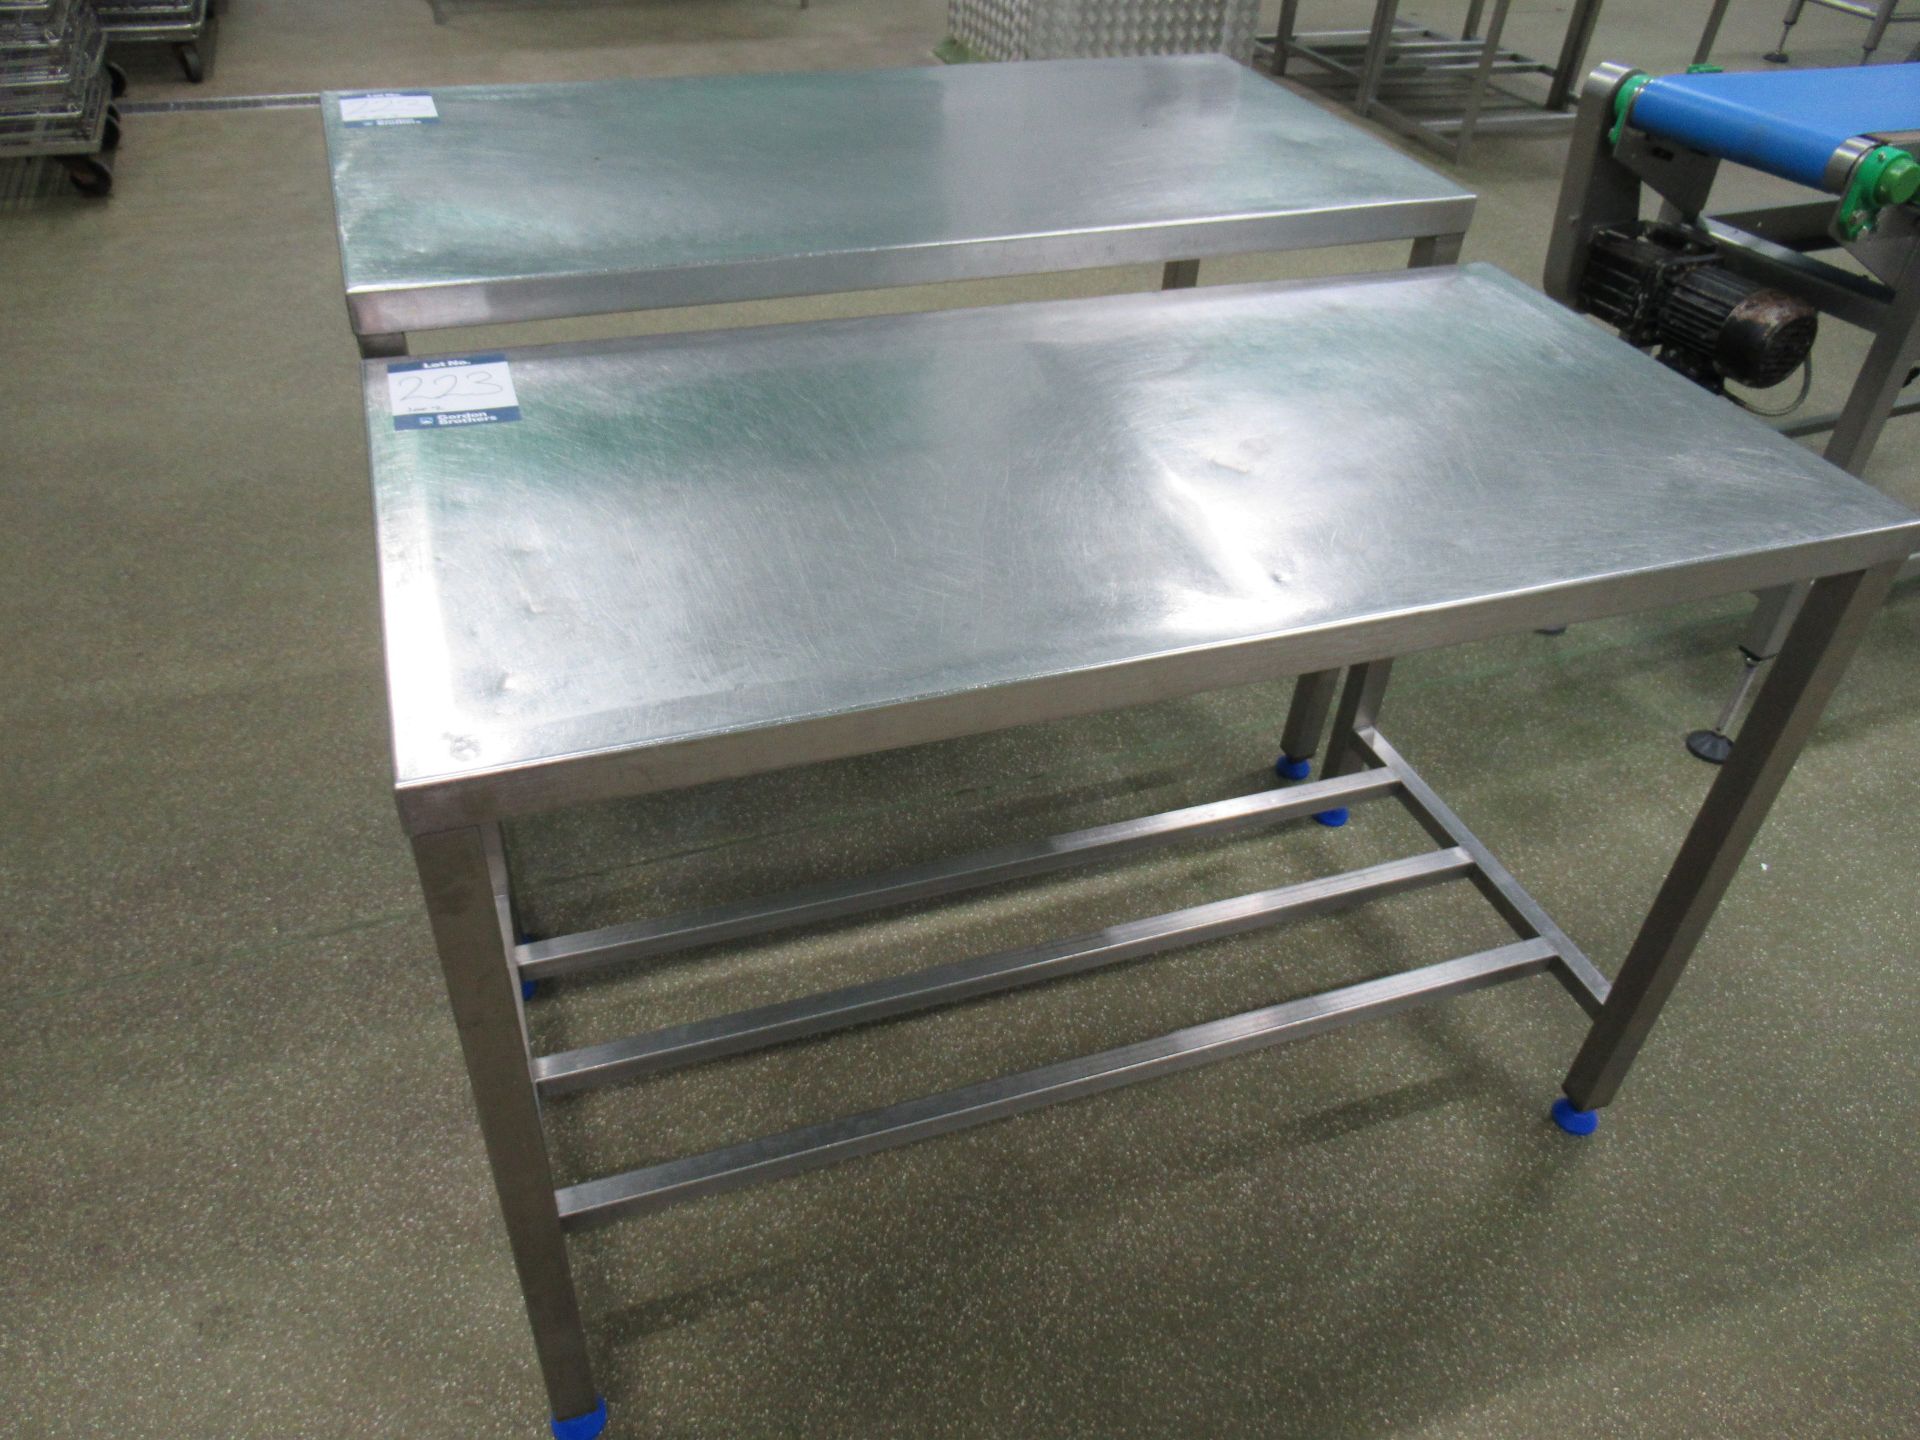 2 Stainless steel tables with 1200 x 600mm work surface